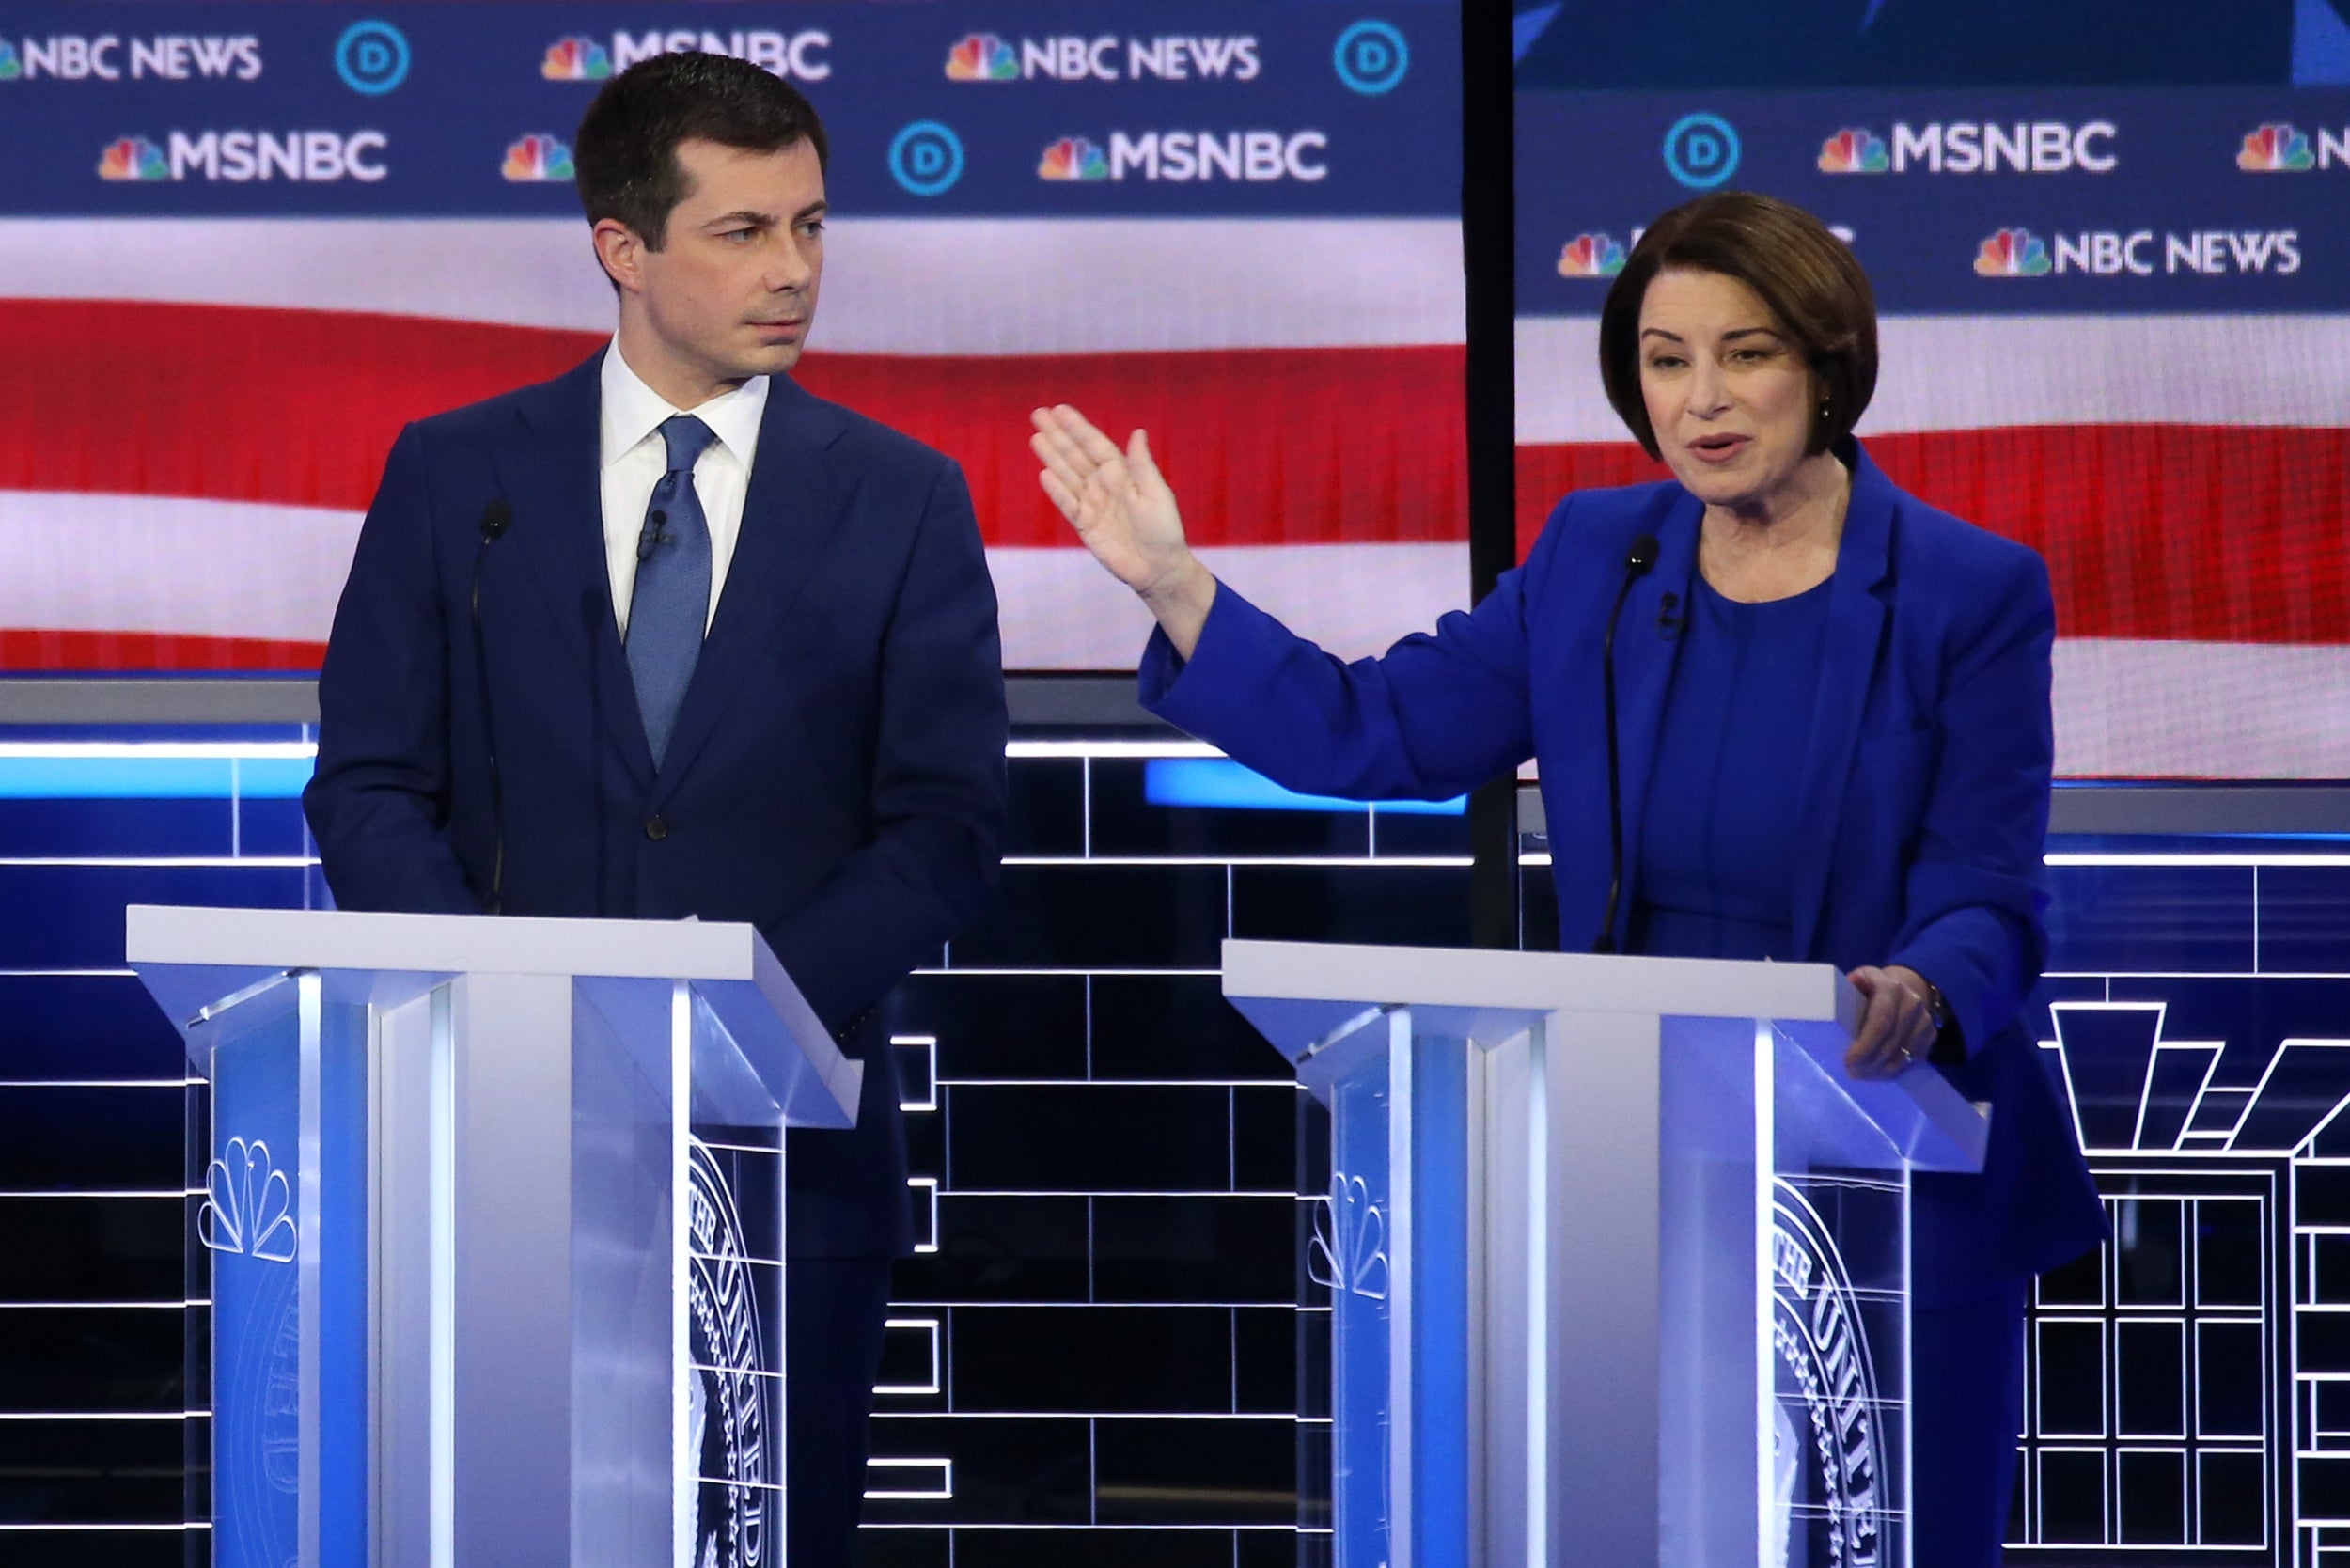 Few of the candidates have direct experience in foreign policy, though Pete Buttigieg has been on deployment to Afghanistan